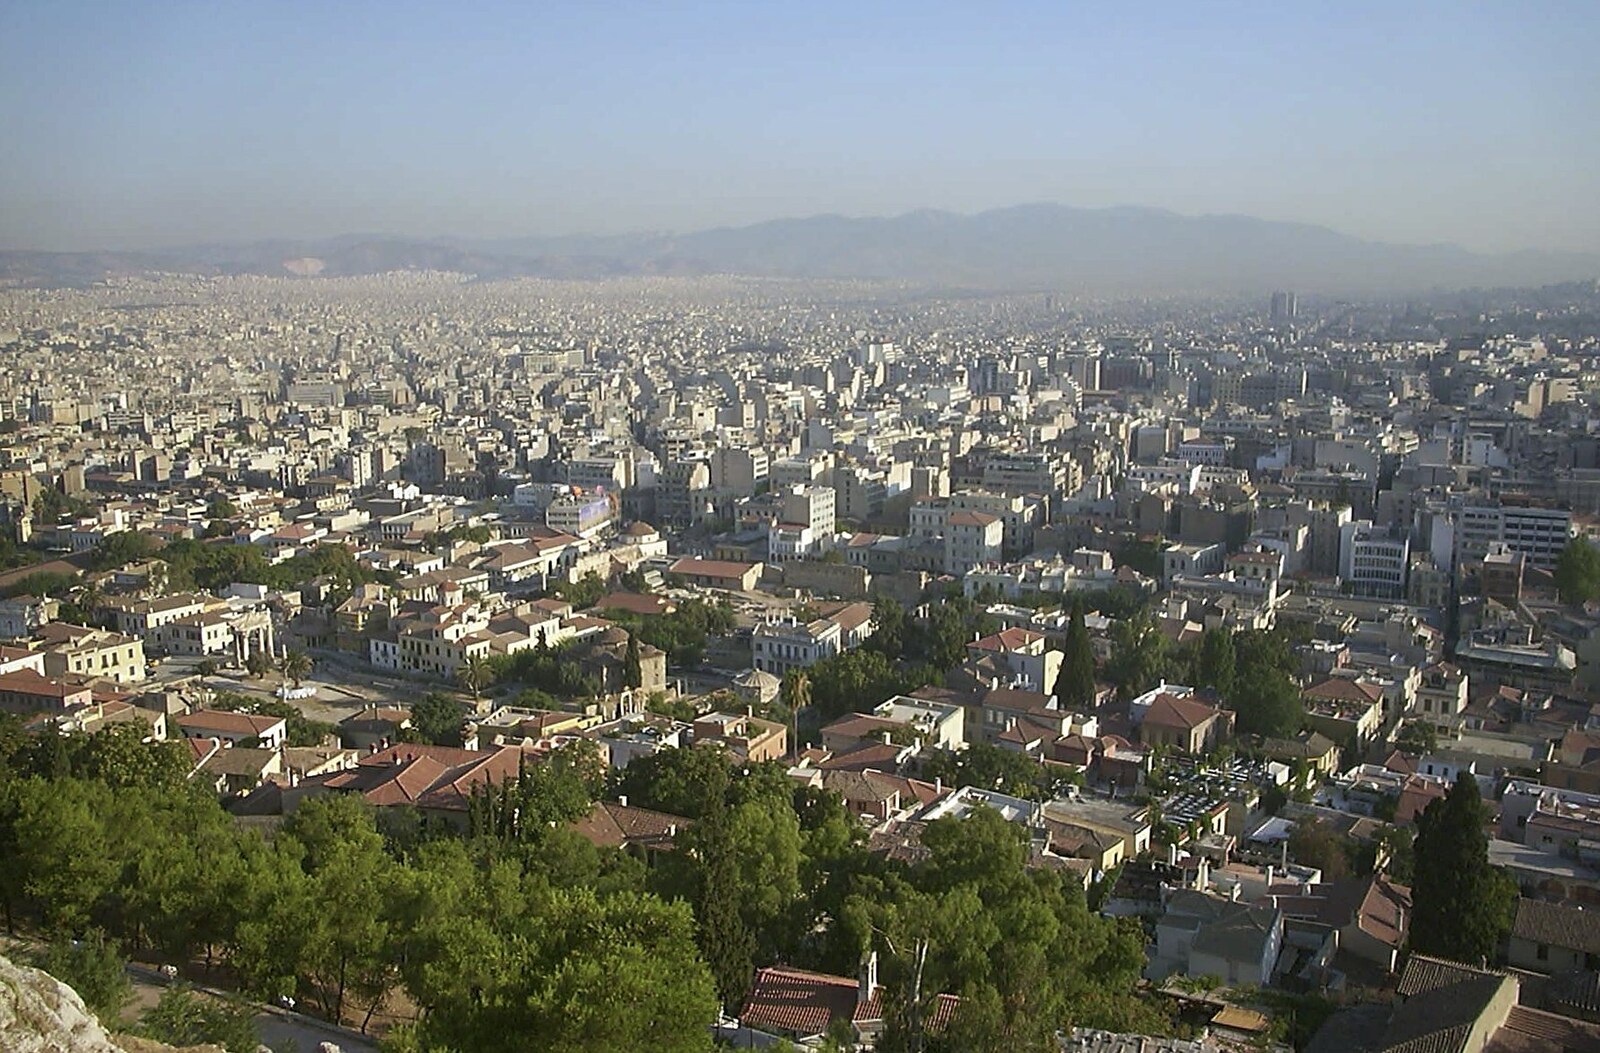 A Postcard From Athens: A Day Trip to the Olympics, Greece - 19th August 2004: A view over Athens